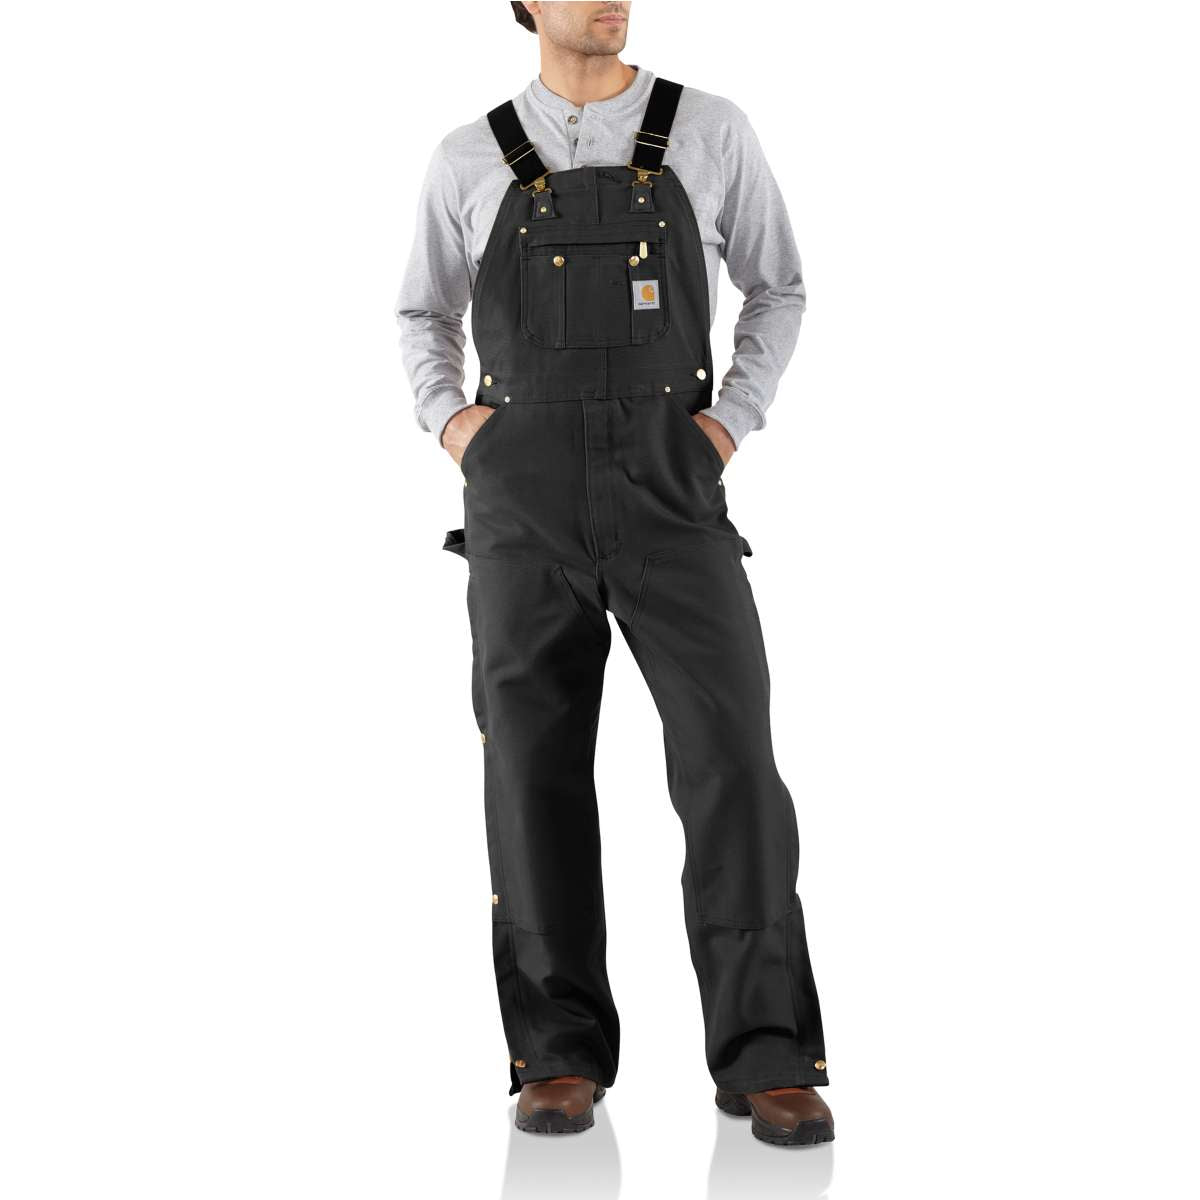 R37 - Loose Fit Firm Duck Bib Overalls